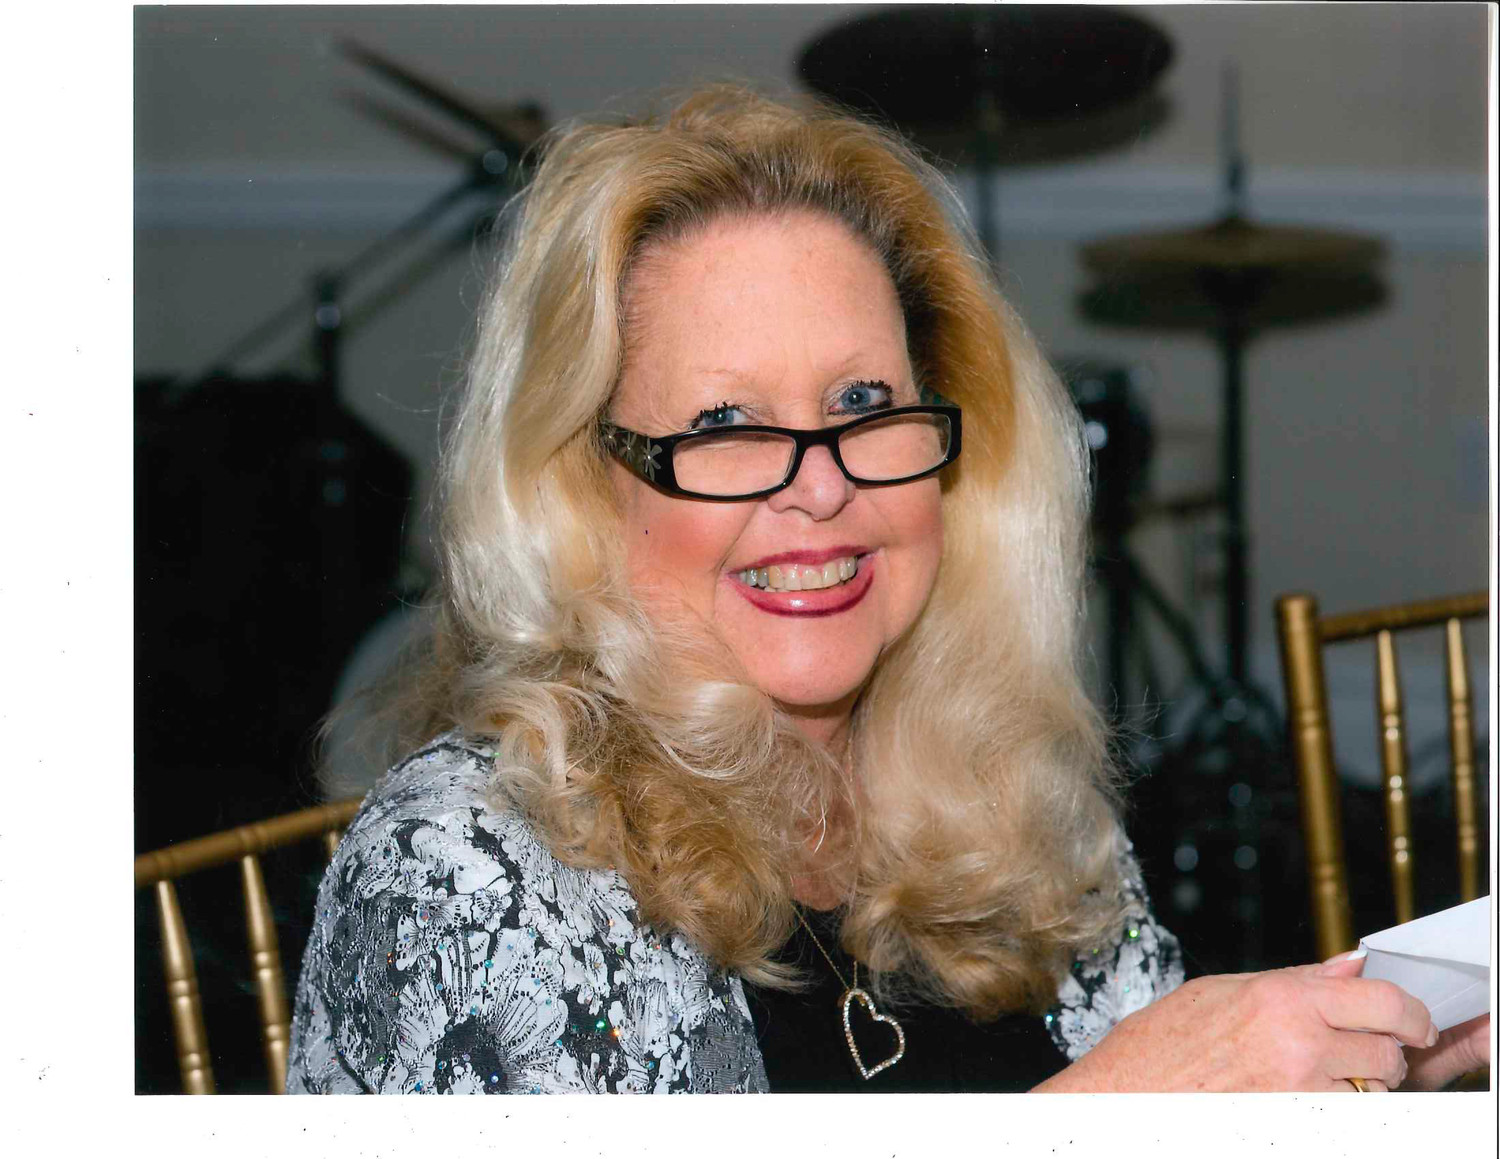 Maureen Mercogliano died suddenly of cancer on Dec. 27. She worked with the Freeport Chamber of Commerce for 16 years.